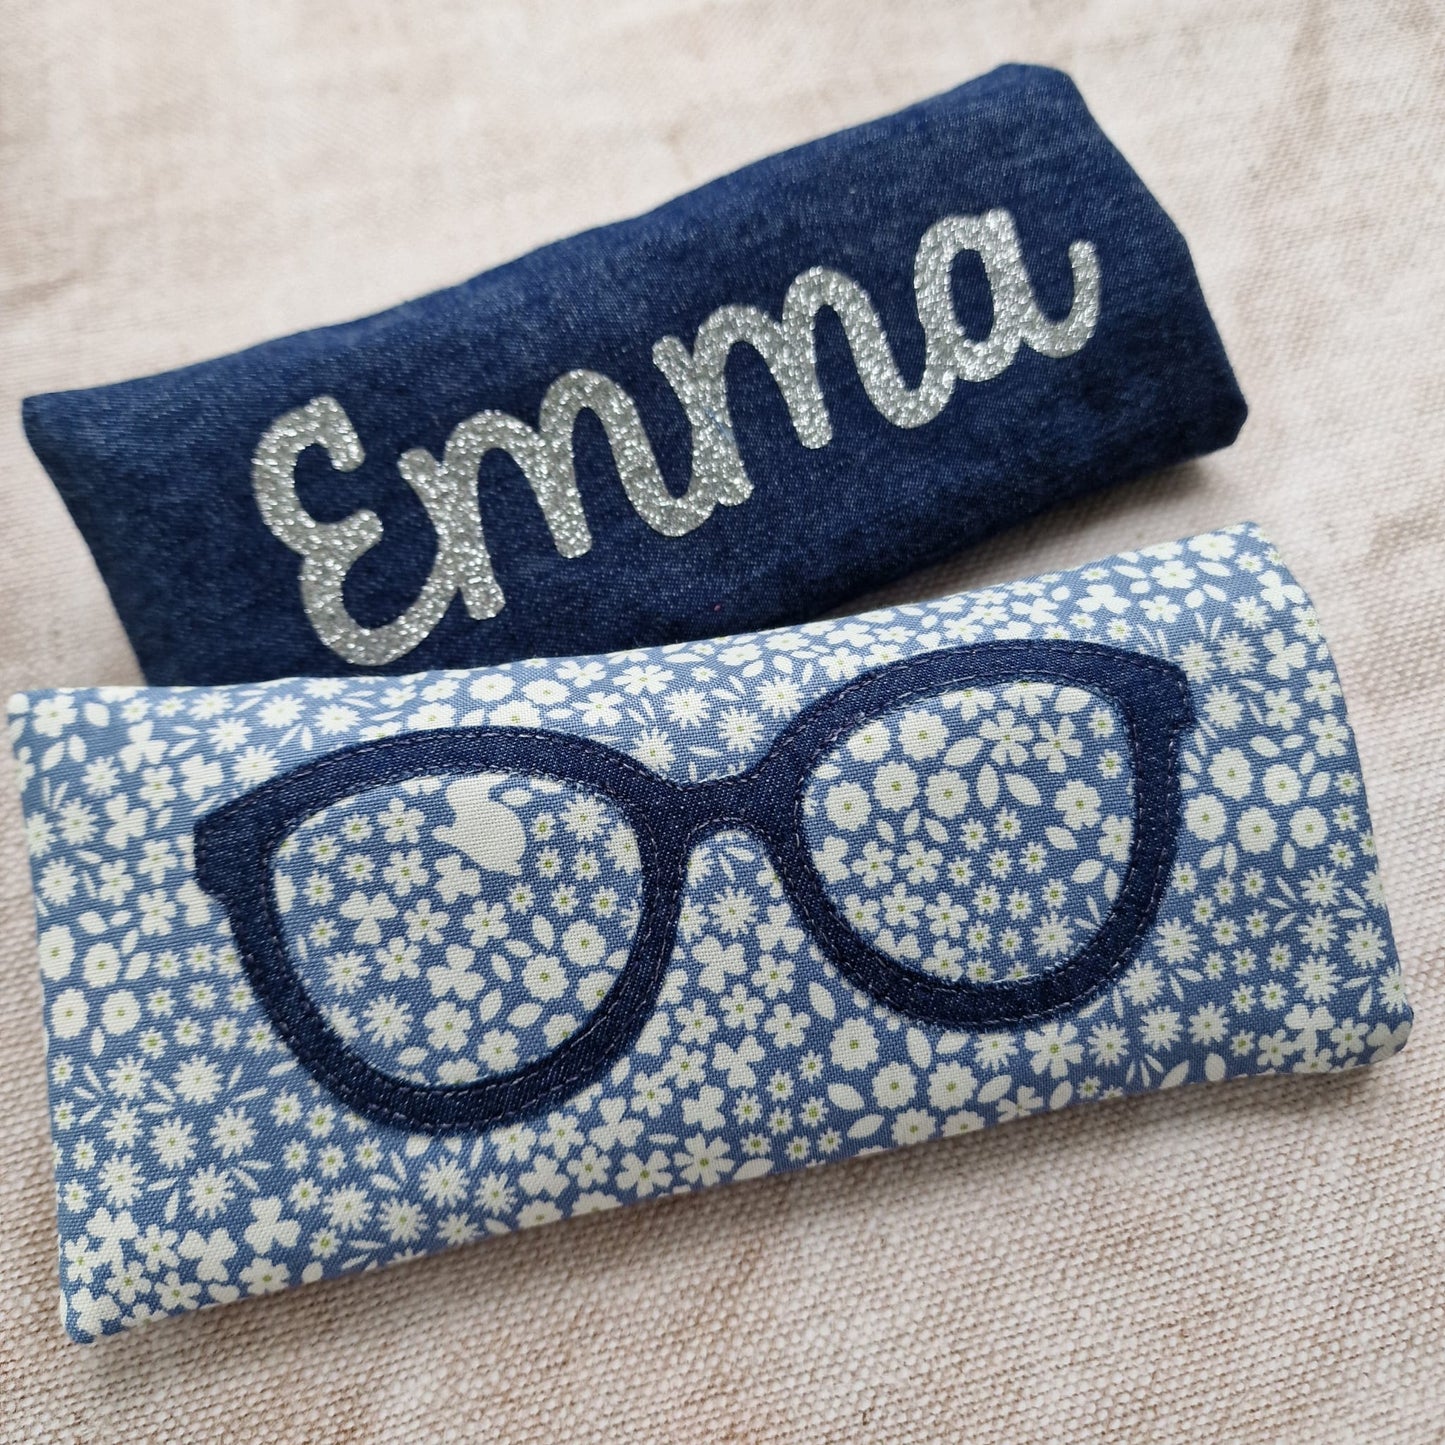 Personalised Sunglasses Pouch